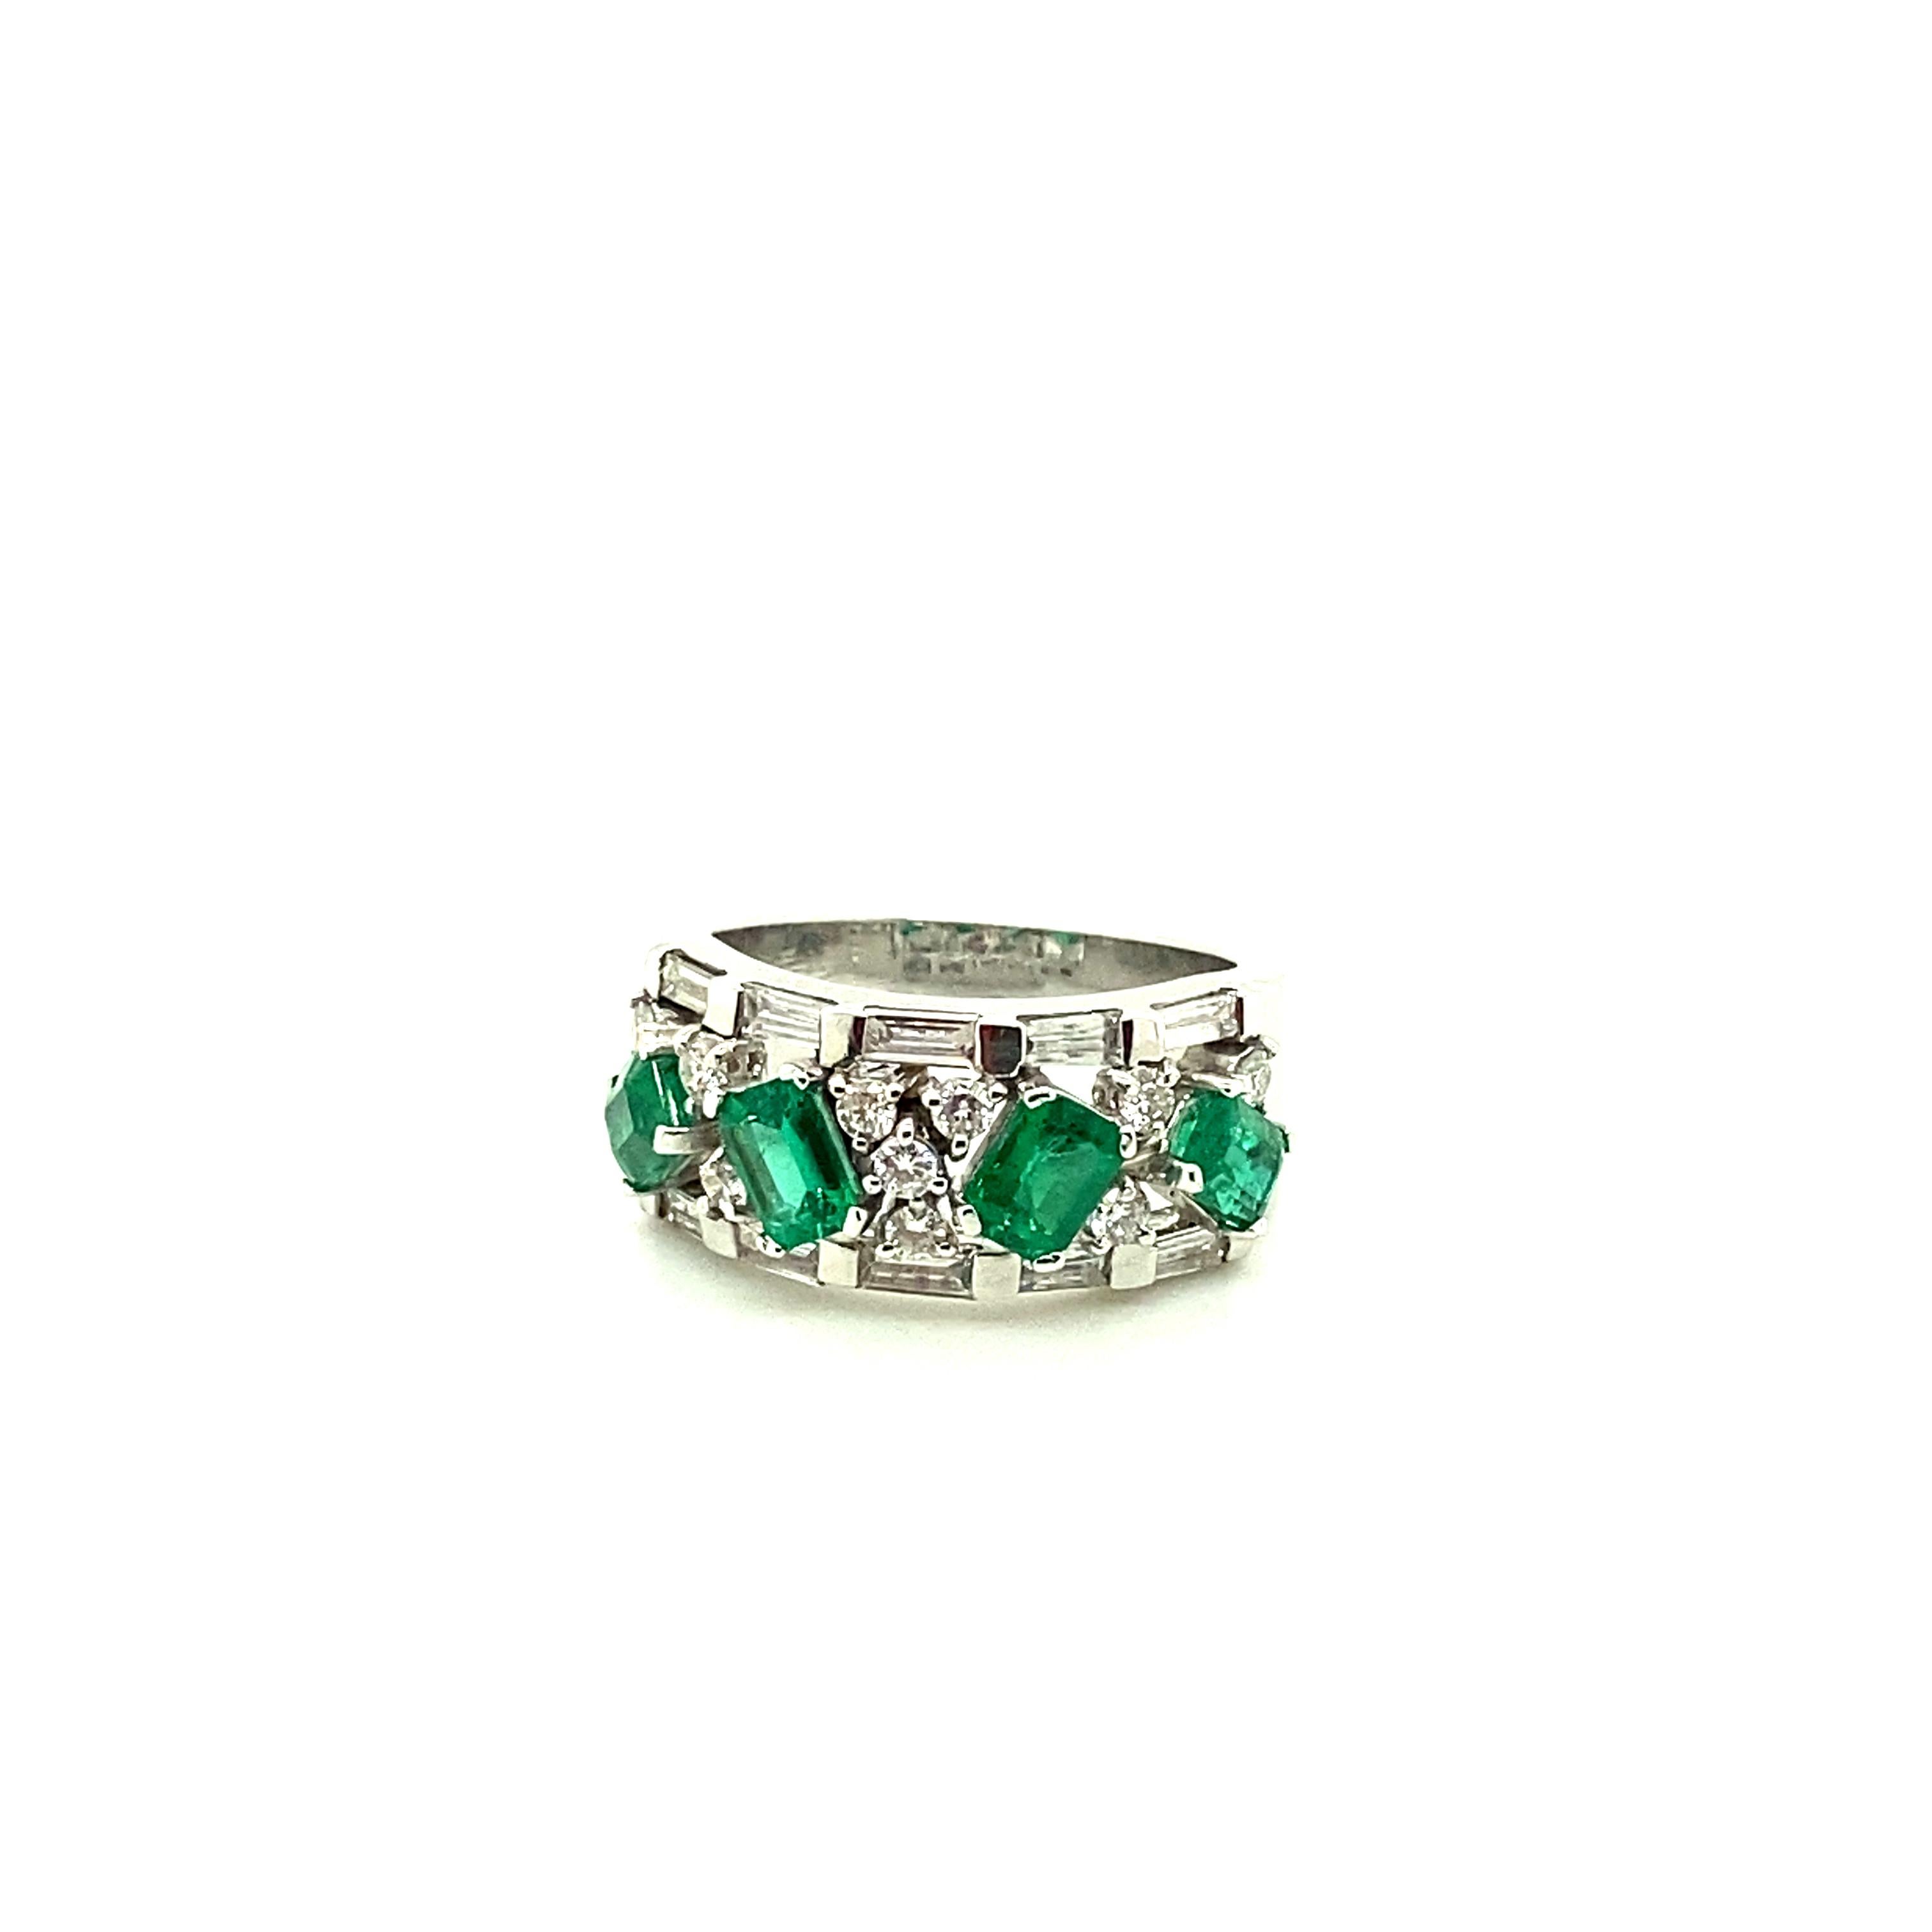 Vivid Green Emerald and White Diamond Gold Eternity Ring:

A beautiful ring, it features four octagon-cut vivid green emeralds weighing 1.28 carat surrounded by a flurry of white diamonds weighing 0.78 carat. The emeralds are of vivid green colour,